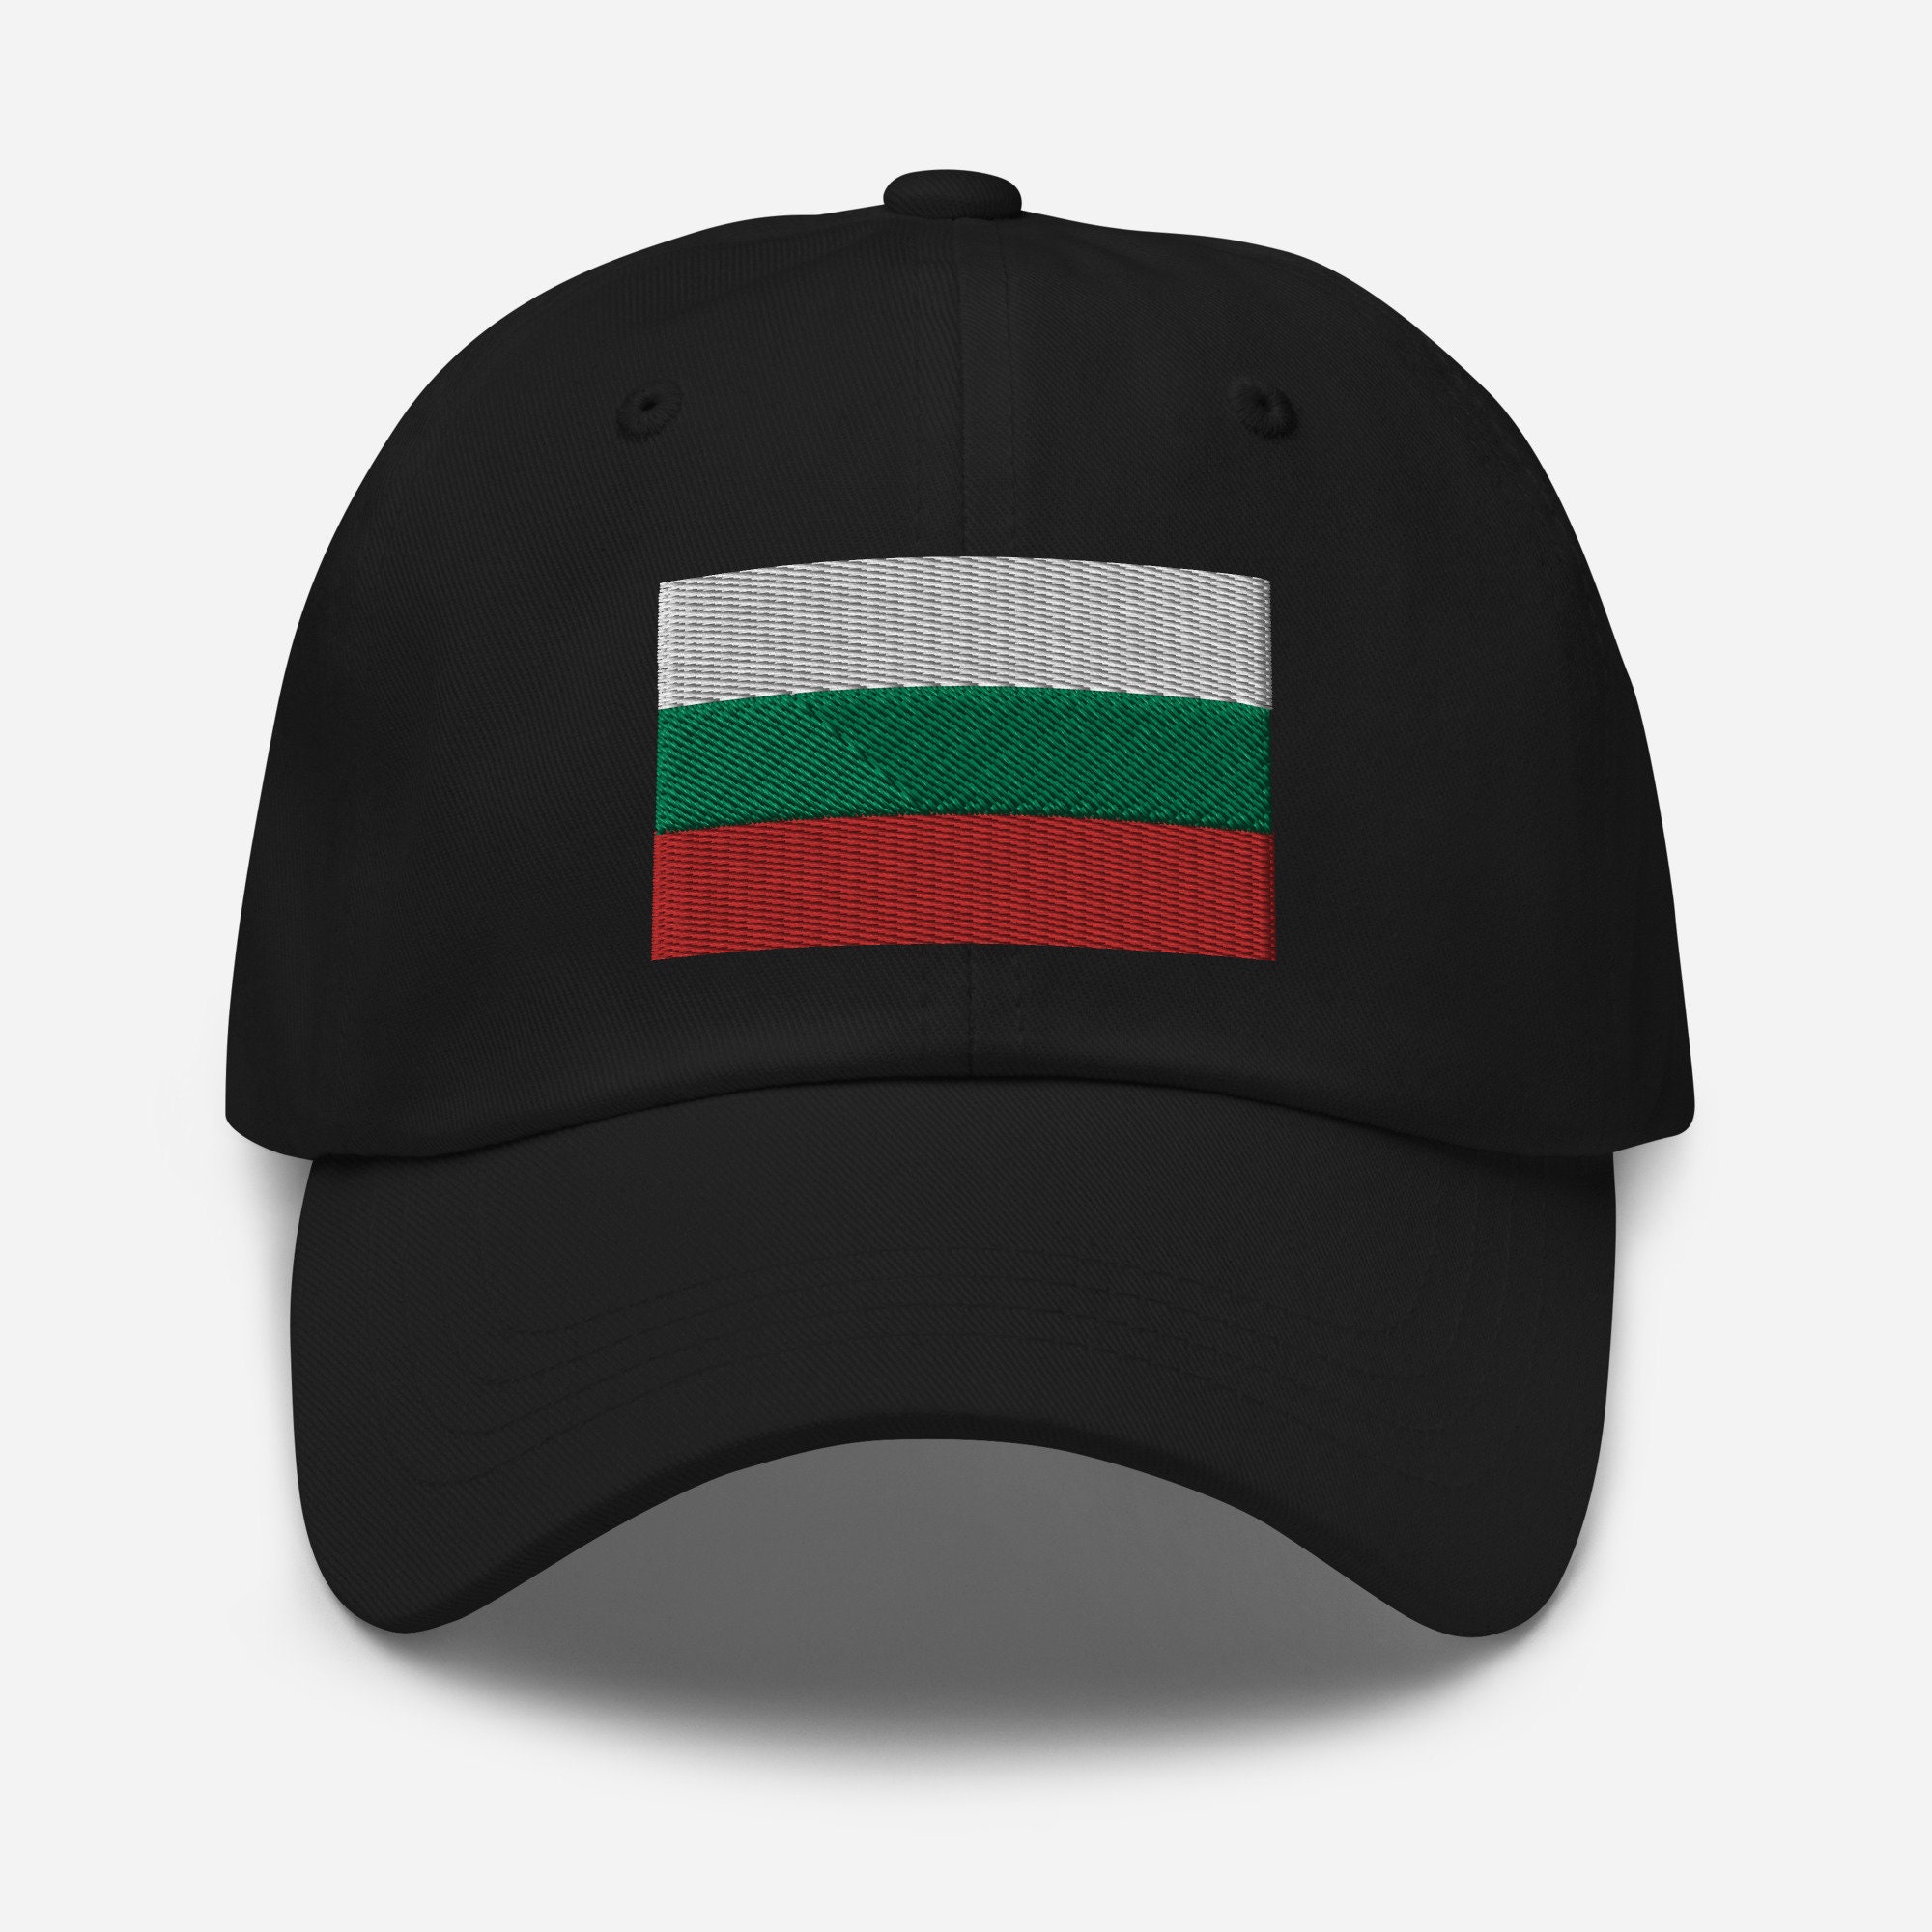 Gucci Hats Black/ Green/Red